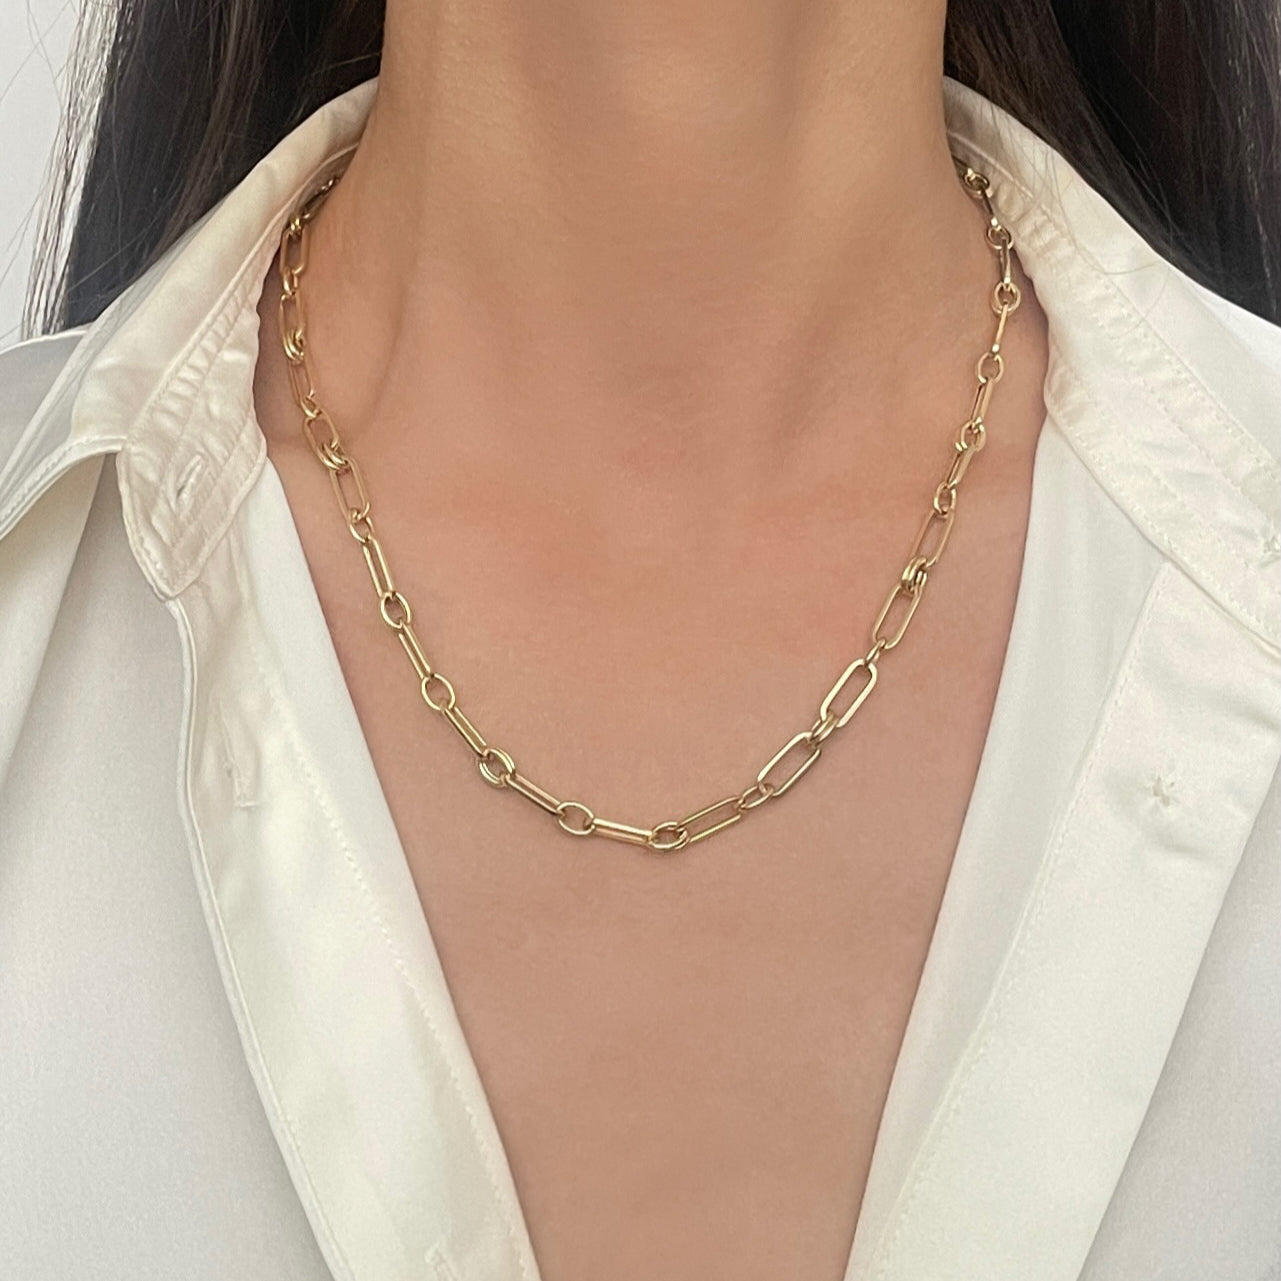 Women's 14K Gold Long Chain Link Necklace in Yellow Gold by Quince